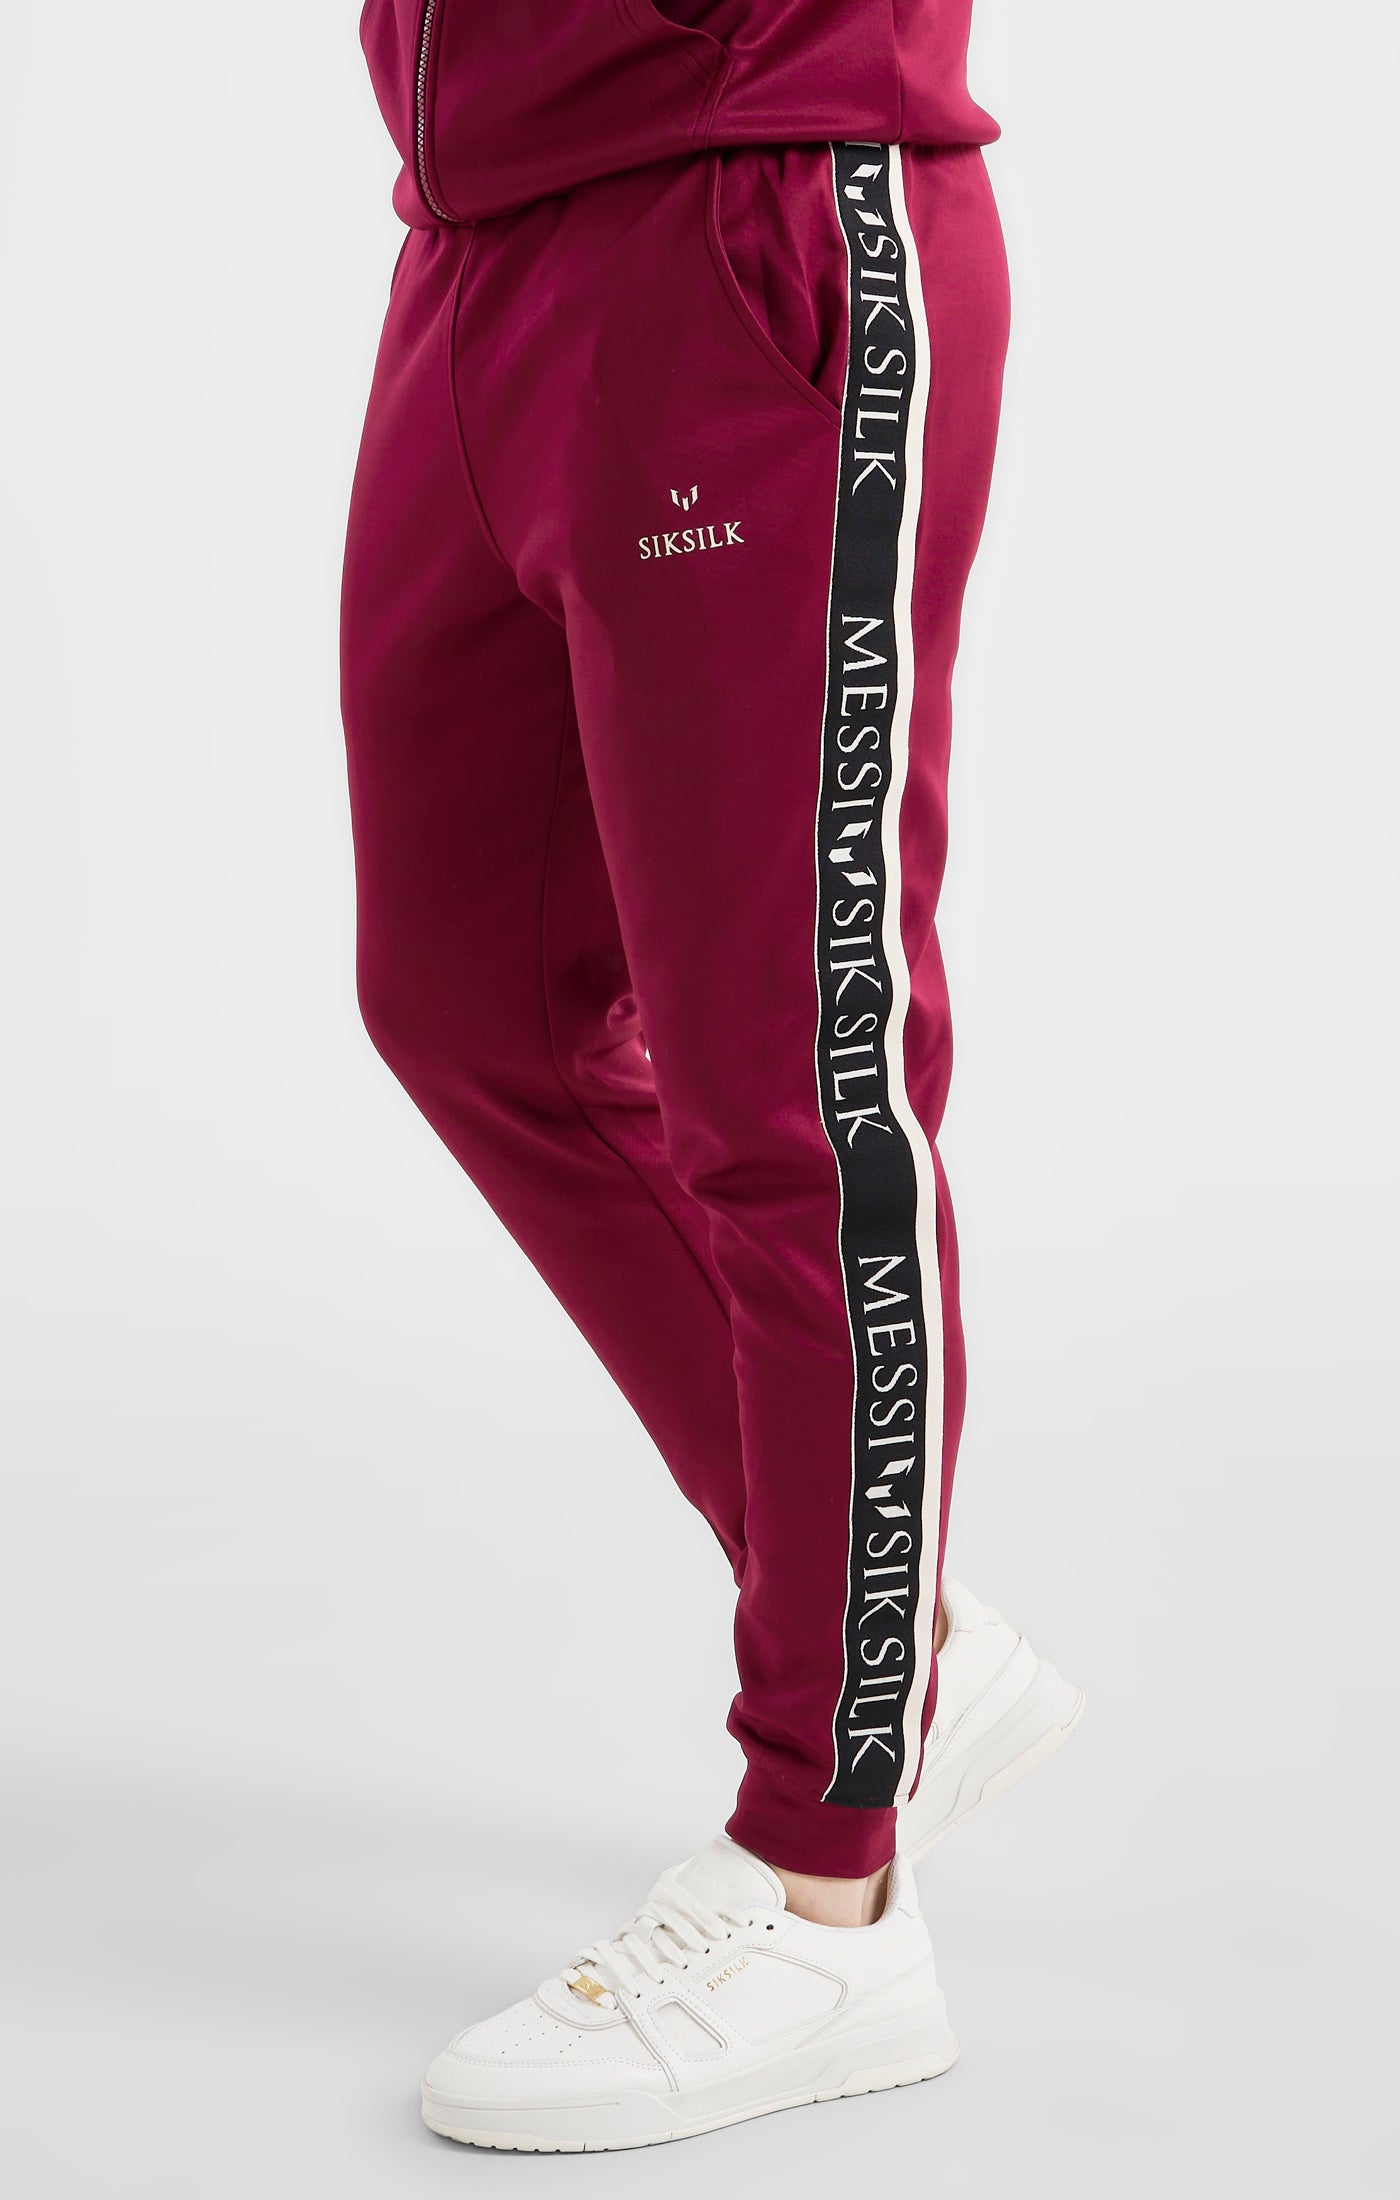 Load image into Gallery viewer, Messi x SikSilk Taped Pant - Burgundy